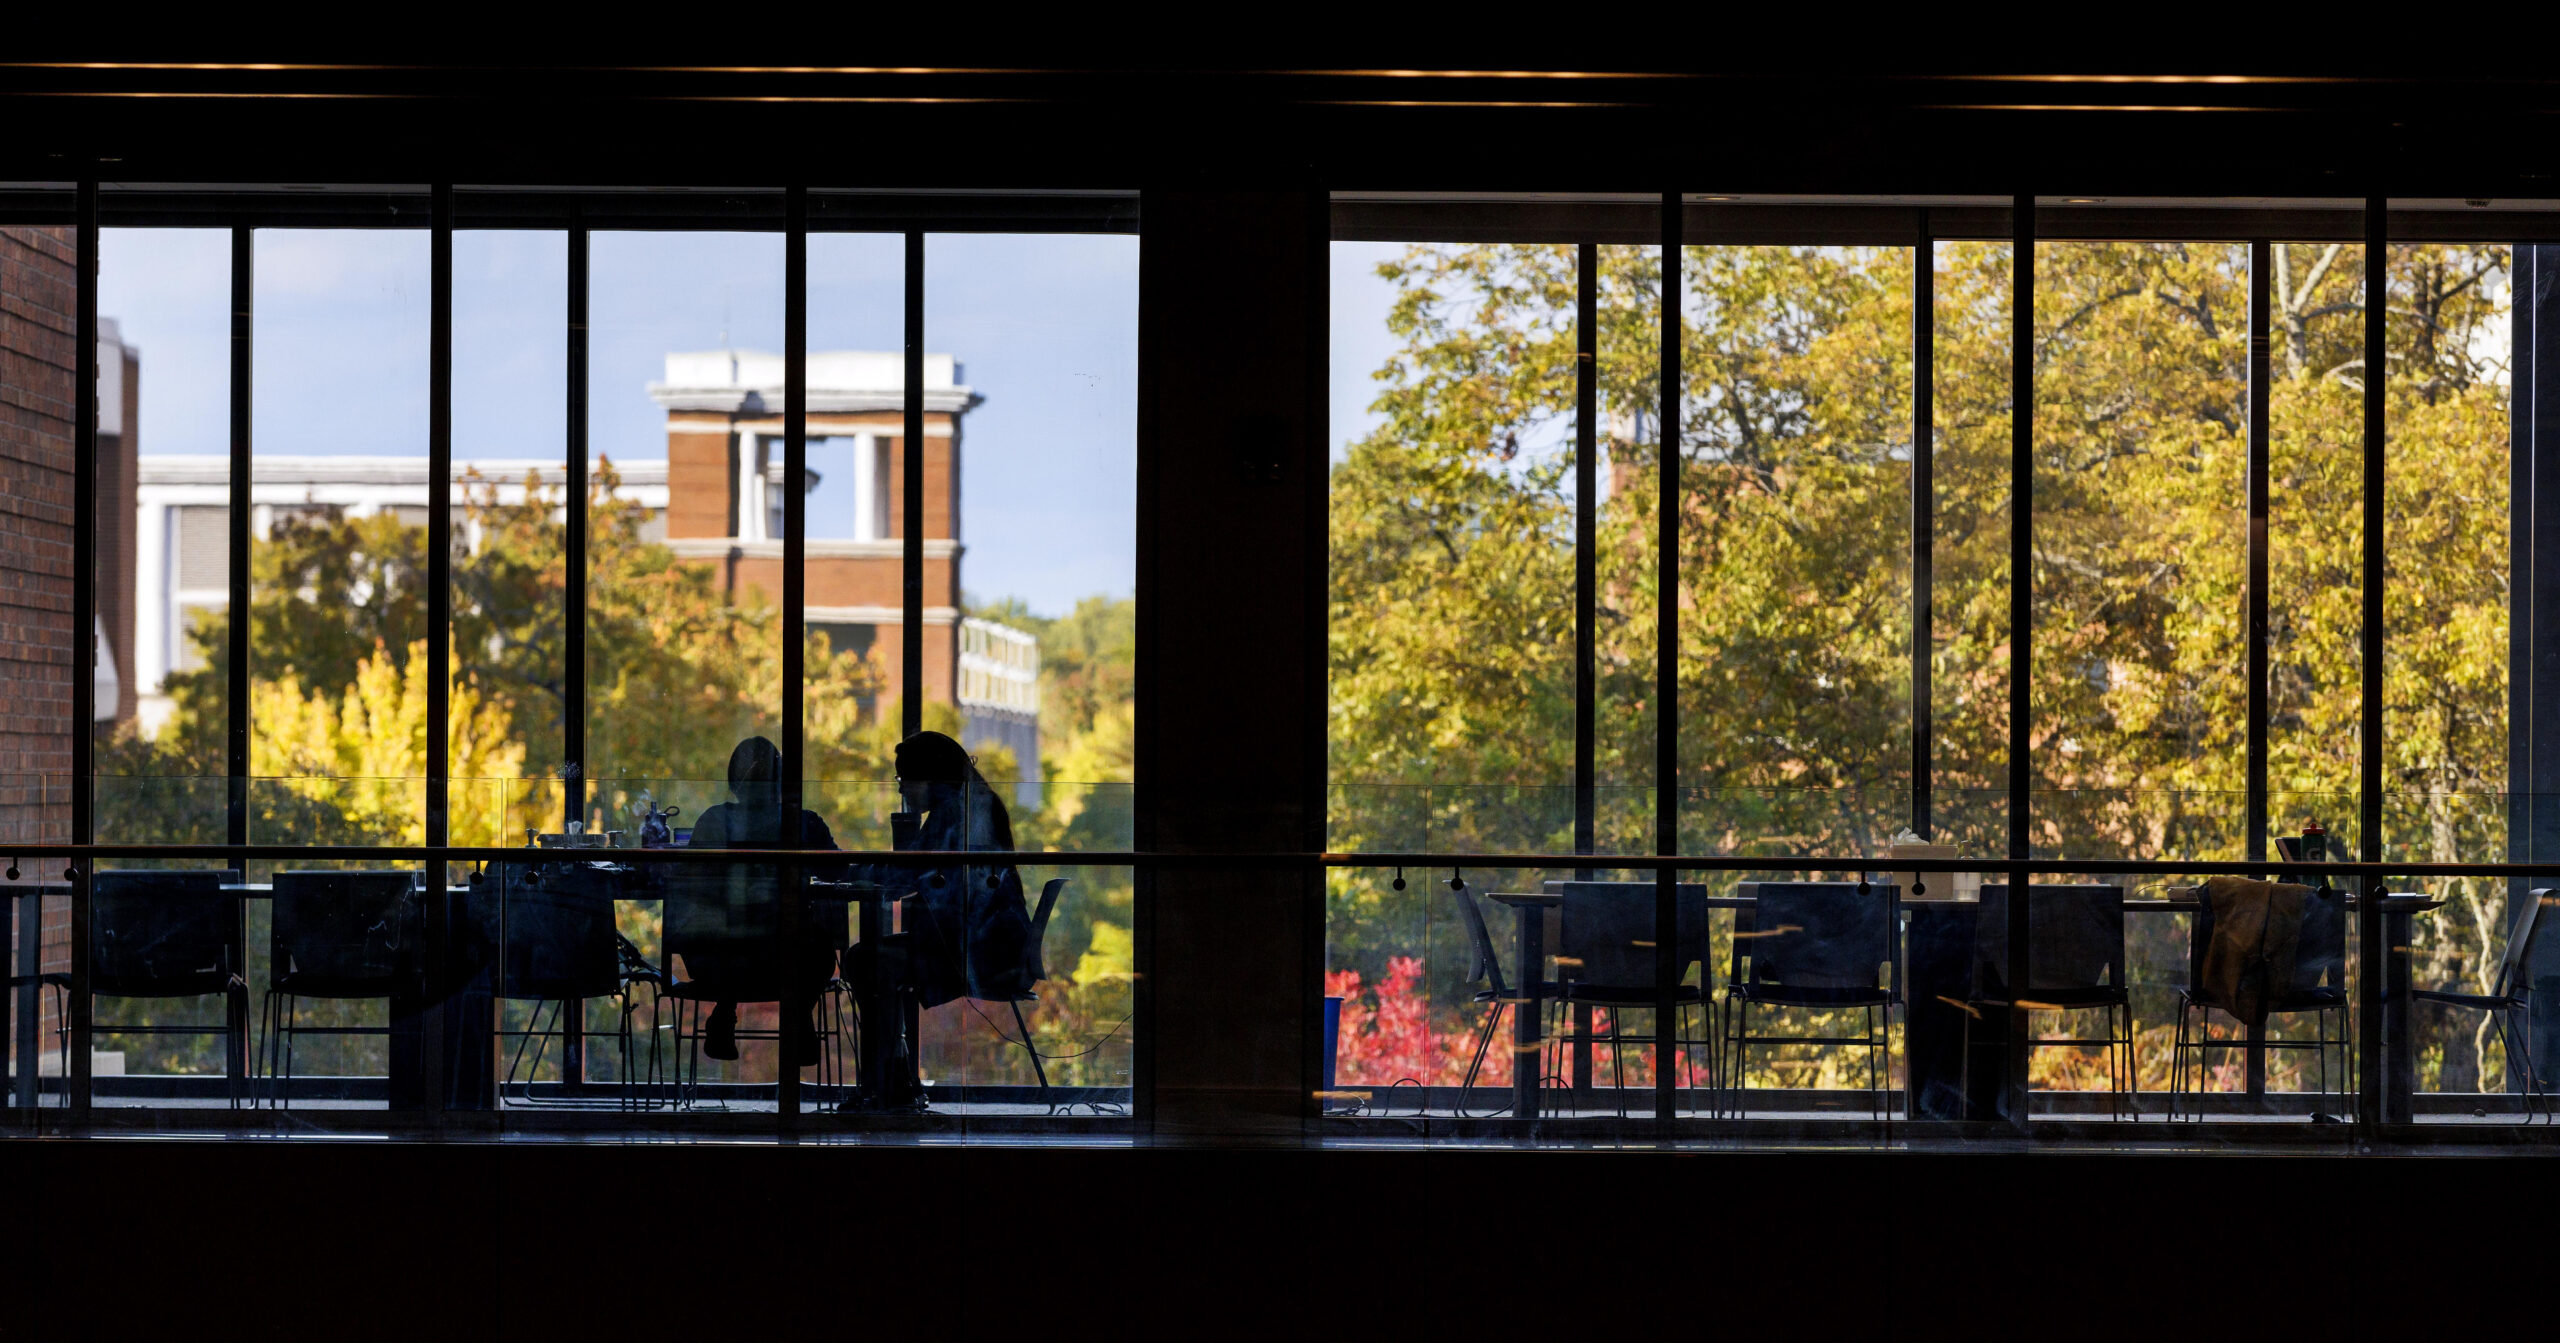 Silhouettes of UNCG students seated by large windows.